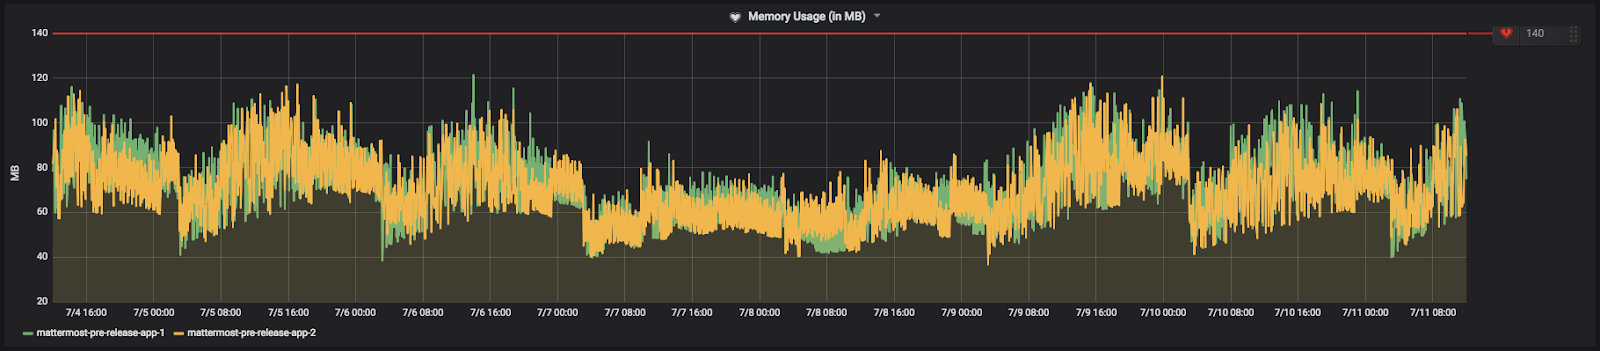 Example memory usage metrics for the Mattermost Community Server, where the threshold is configured similarly to the CPU utilization rate.